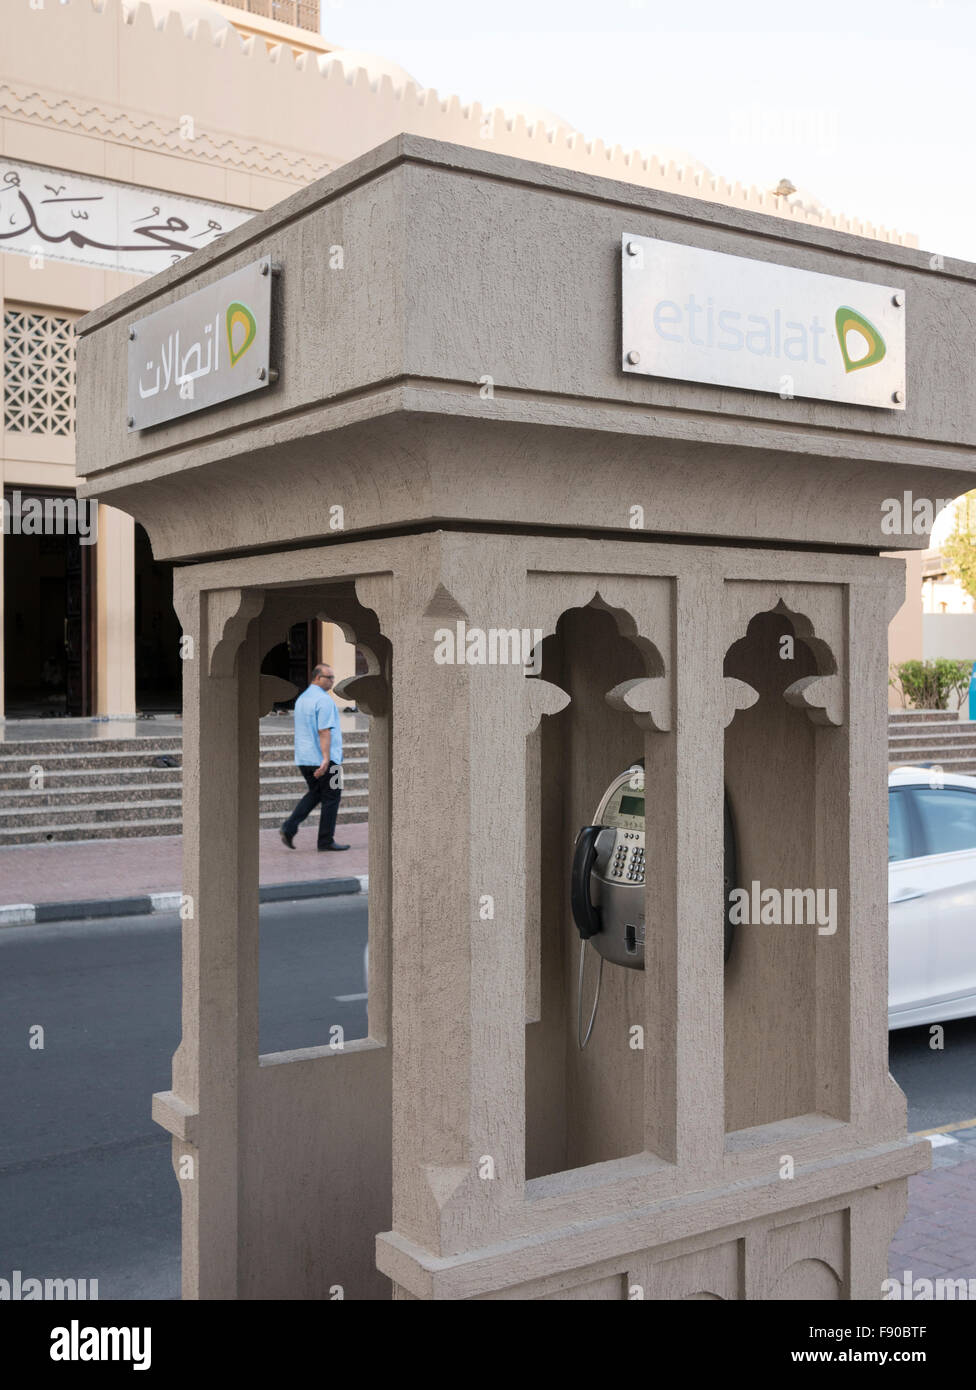 Wind tower style phone booth in Dubai heritage area. Stock Photo